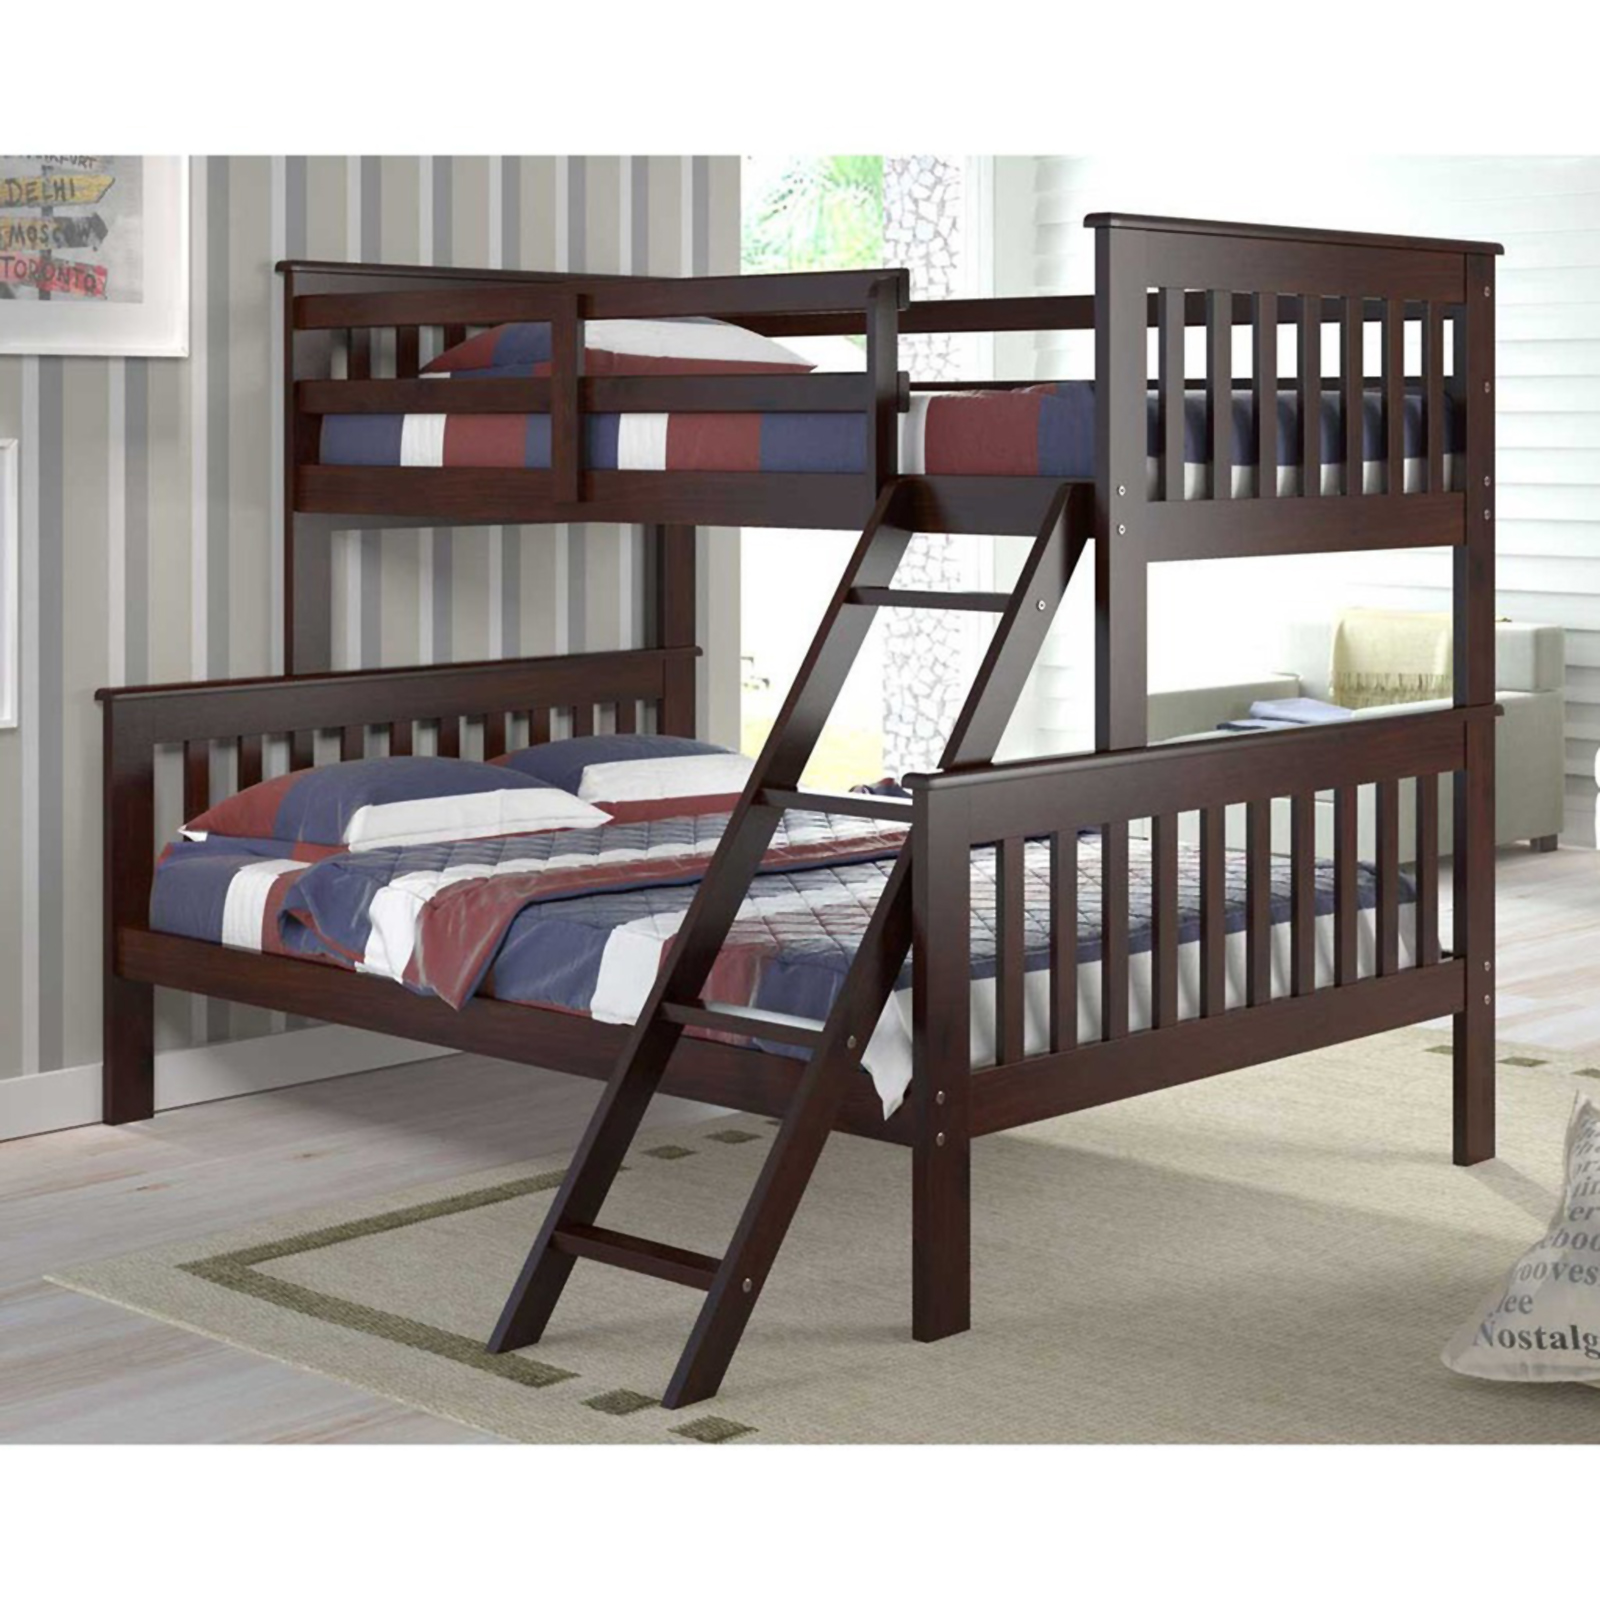 sears bunk beds twin over full